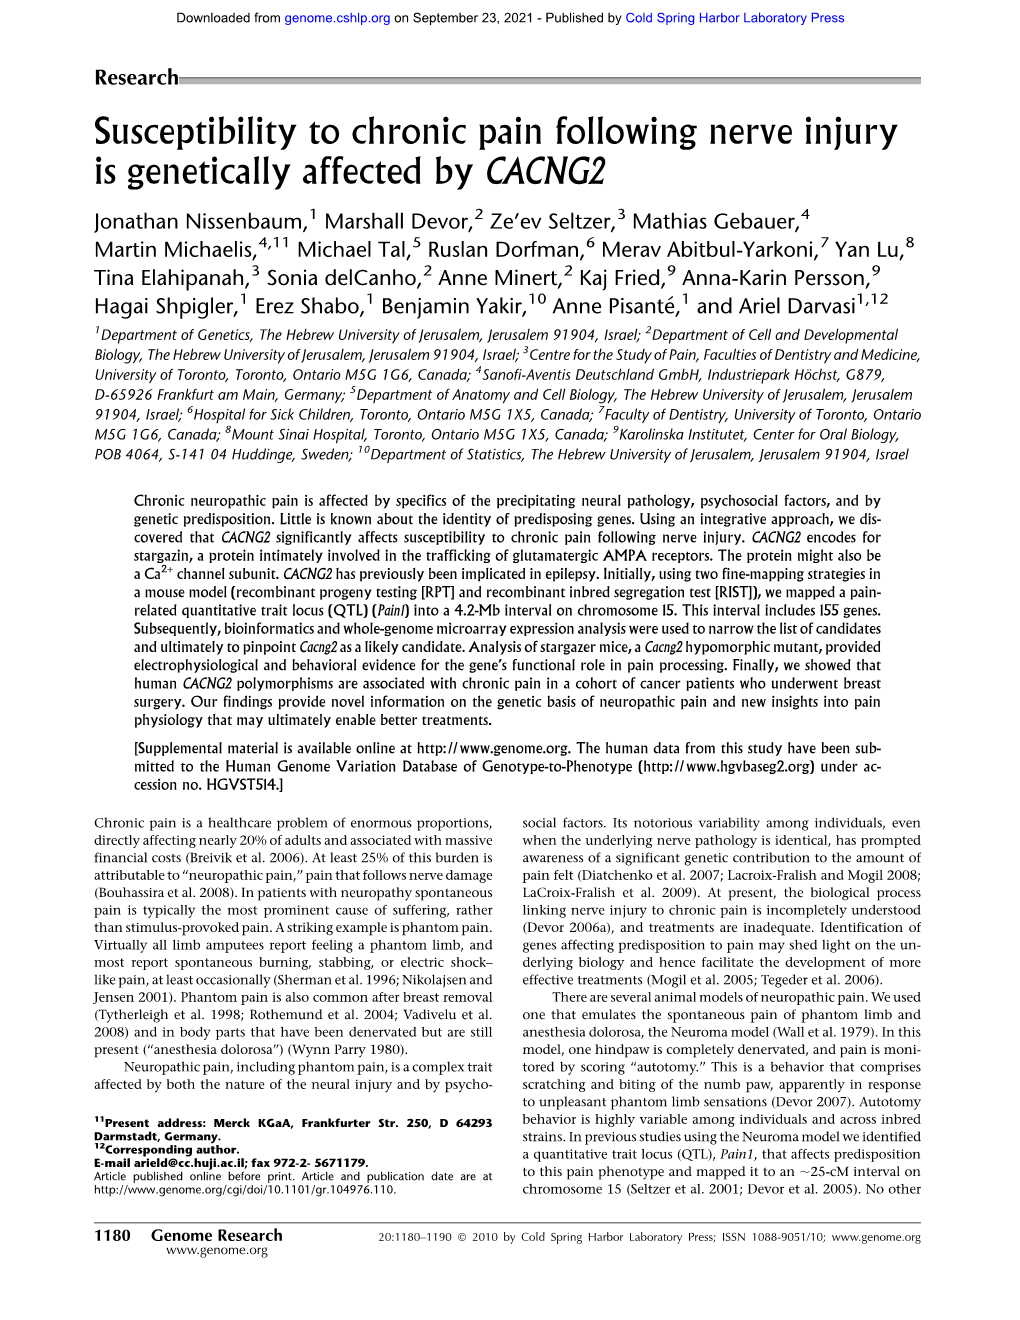 Susceptibility to Chronic Pain Following Nerve Injury Is Genetically Affected by CACNG2